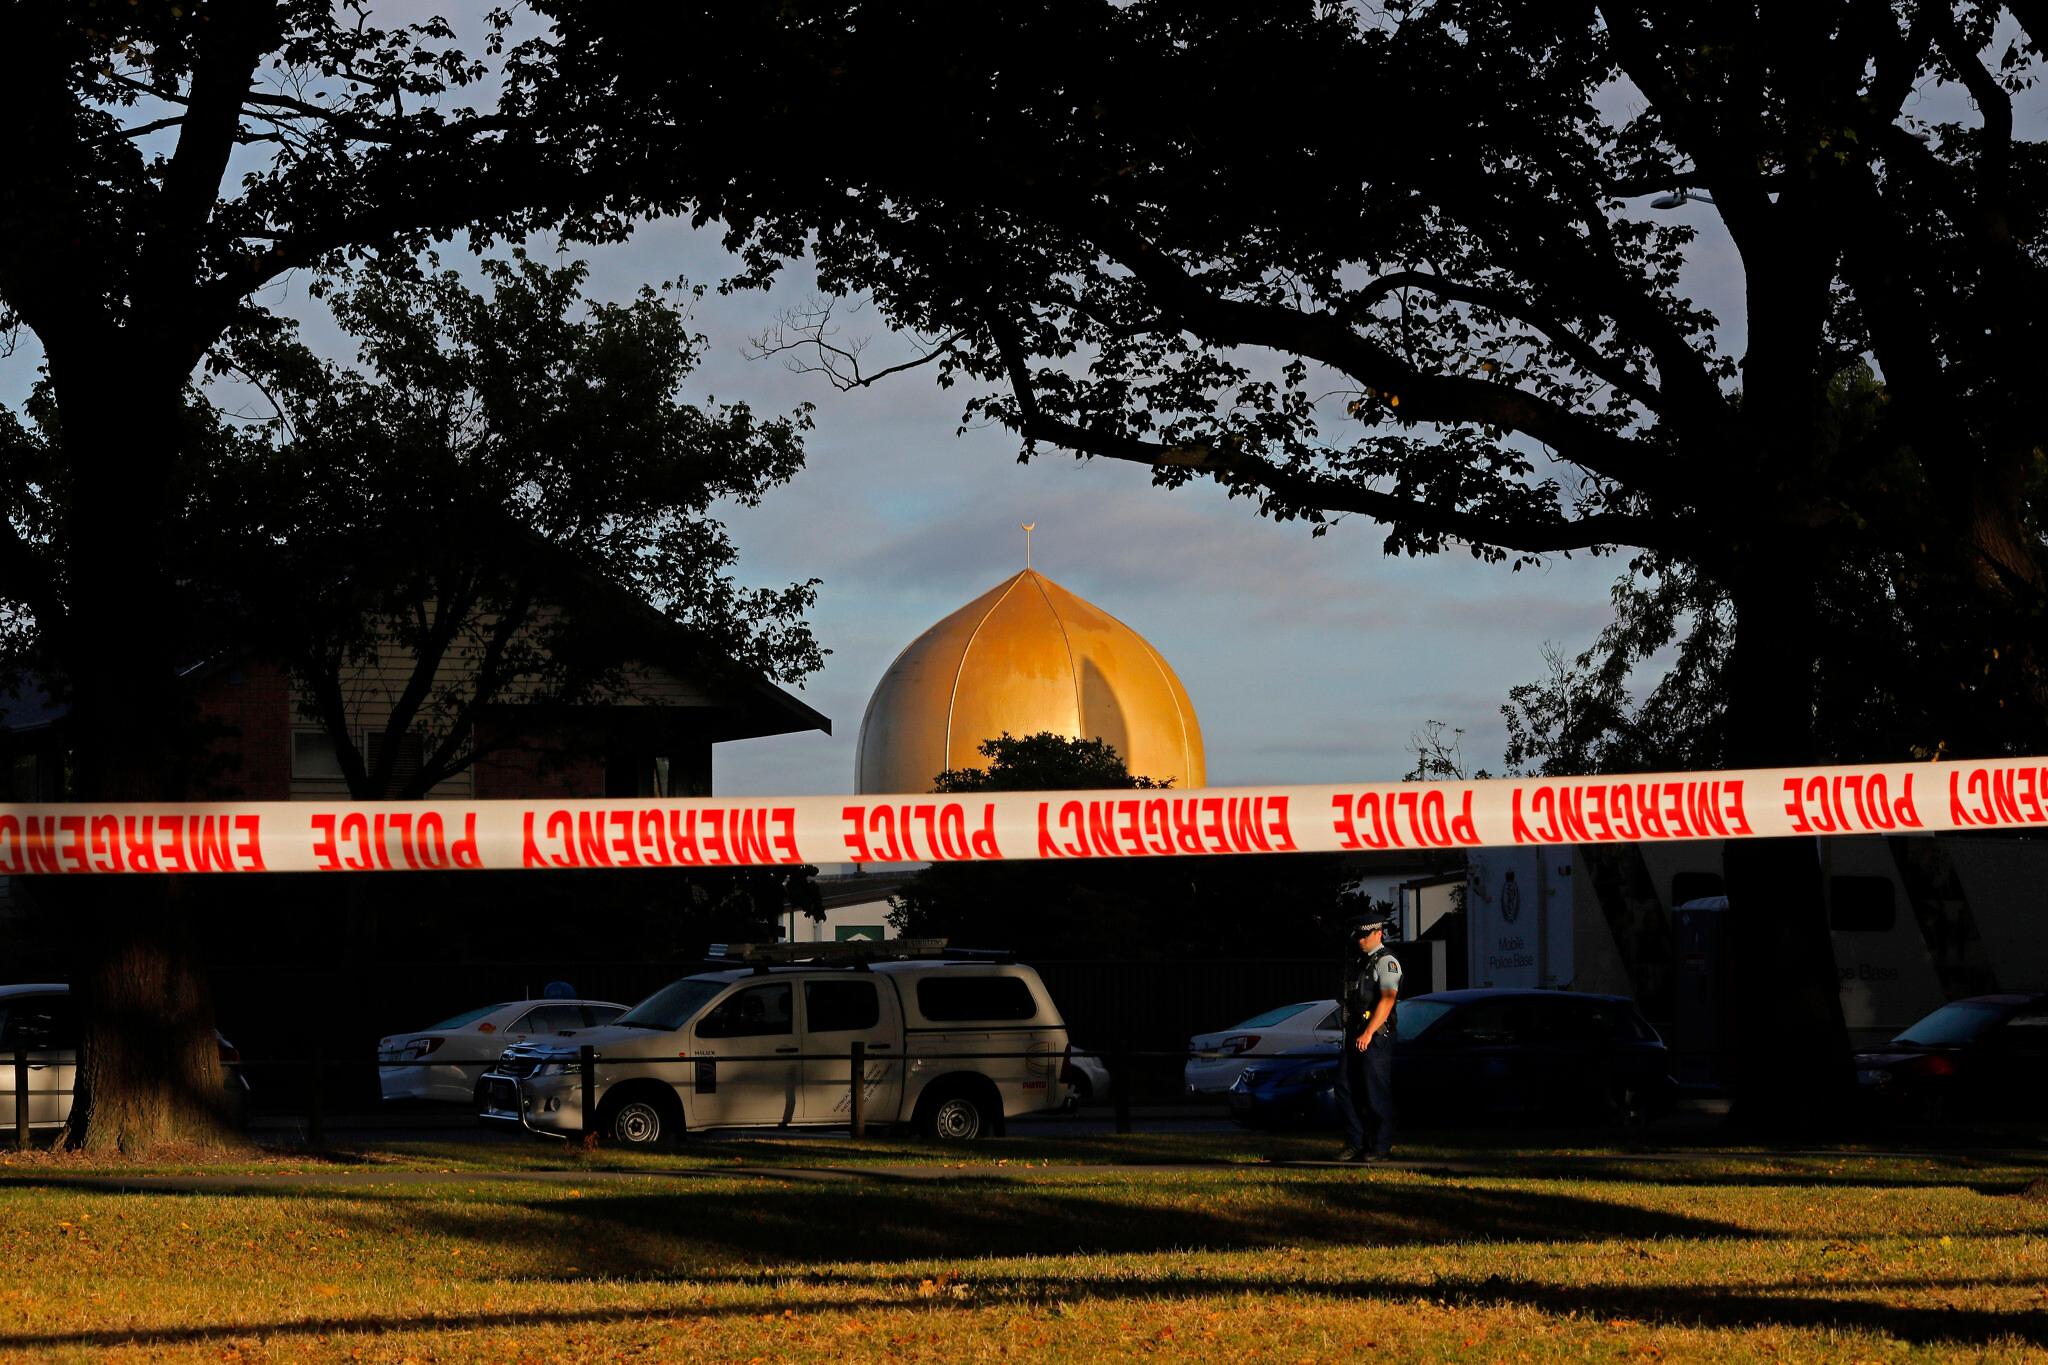 New Zealand arrests two over mosque attacks anniversary threat